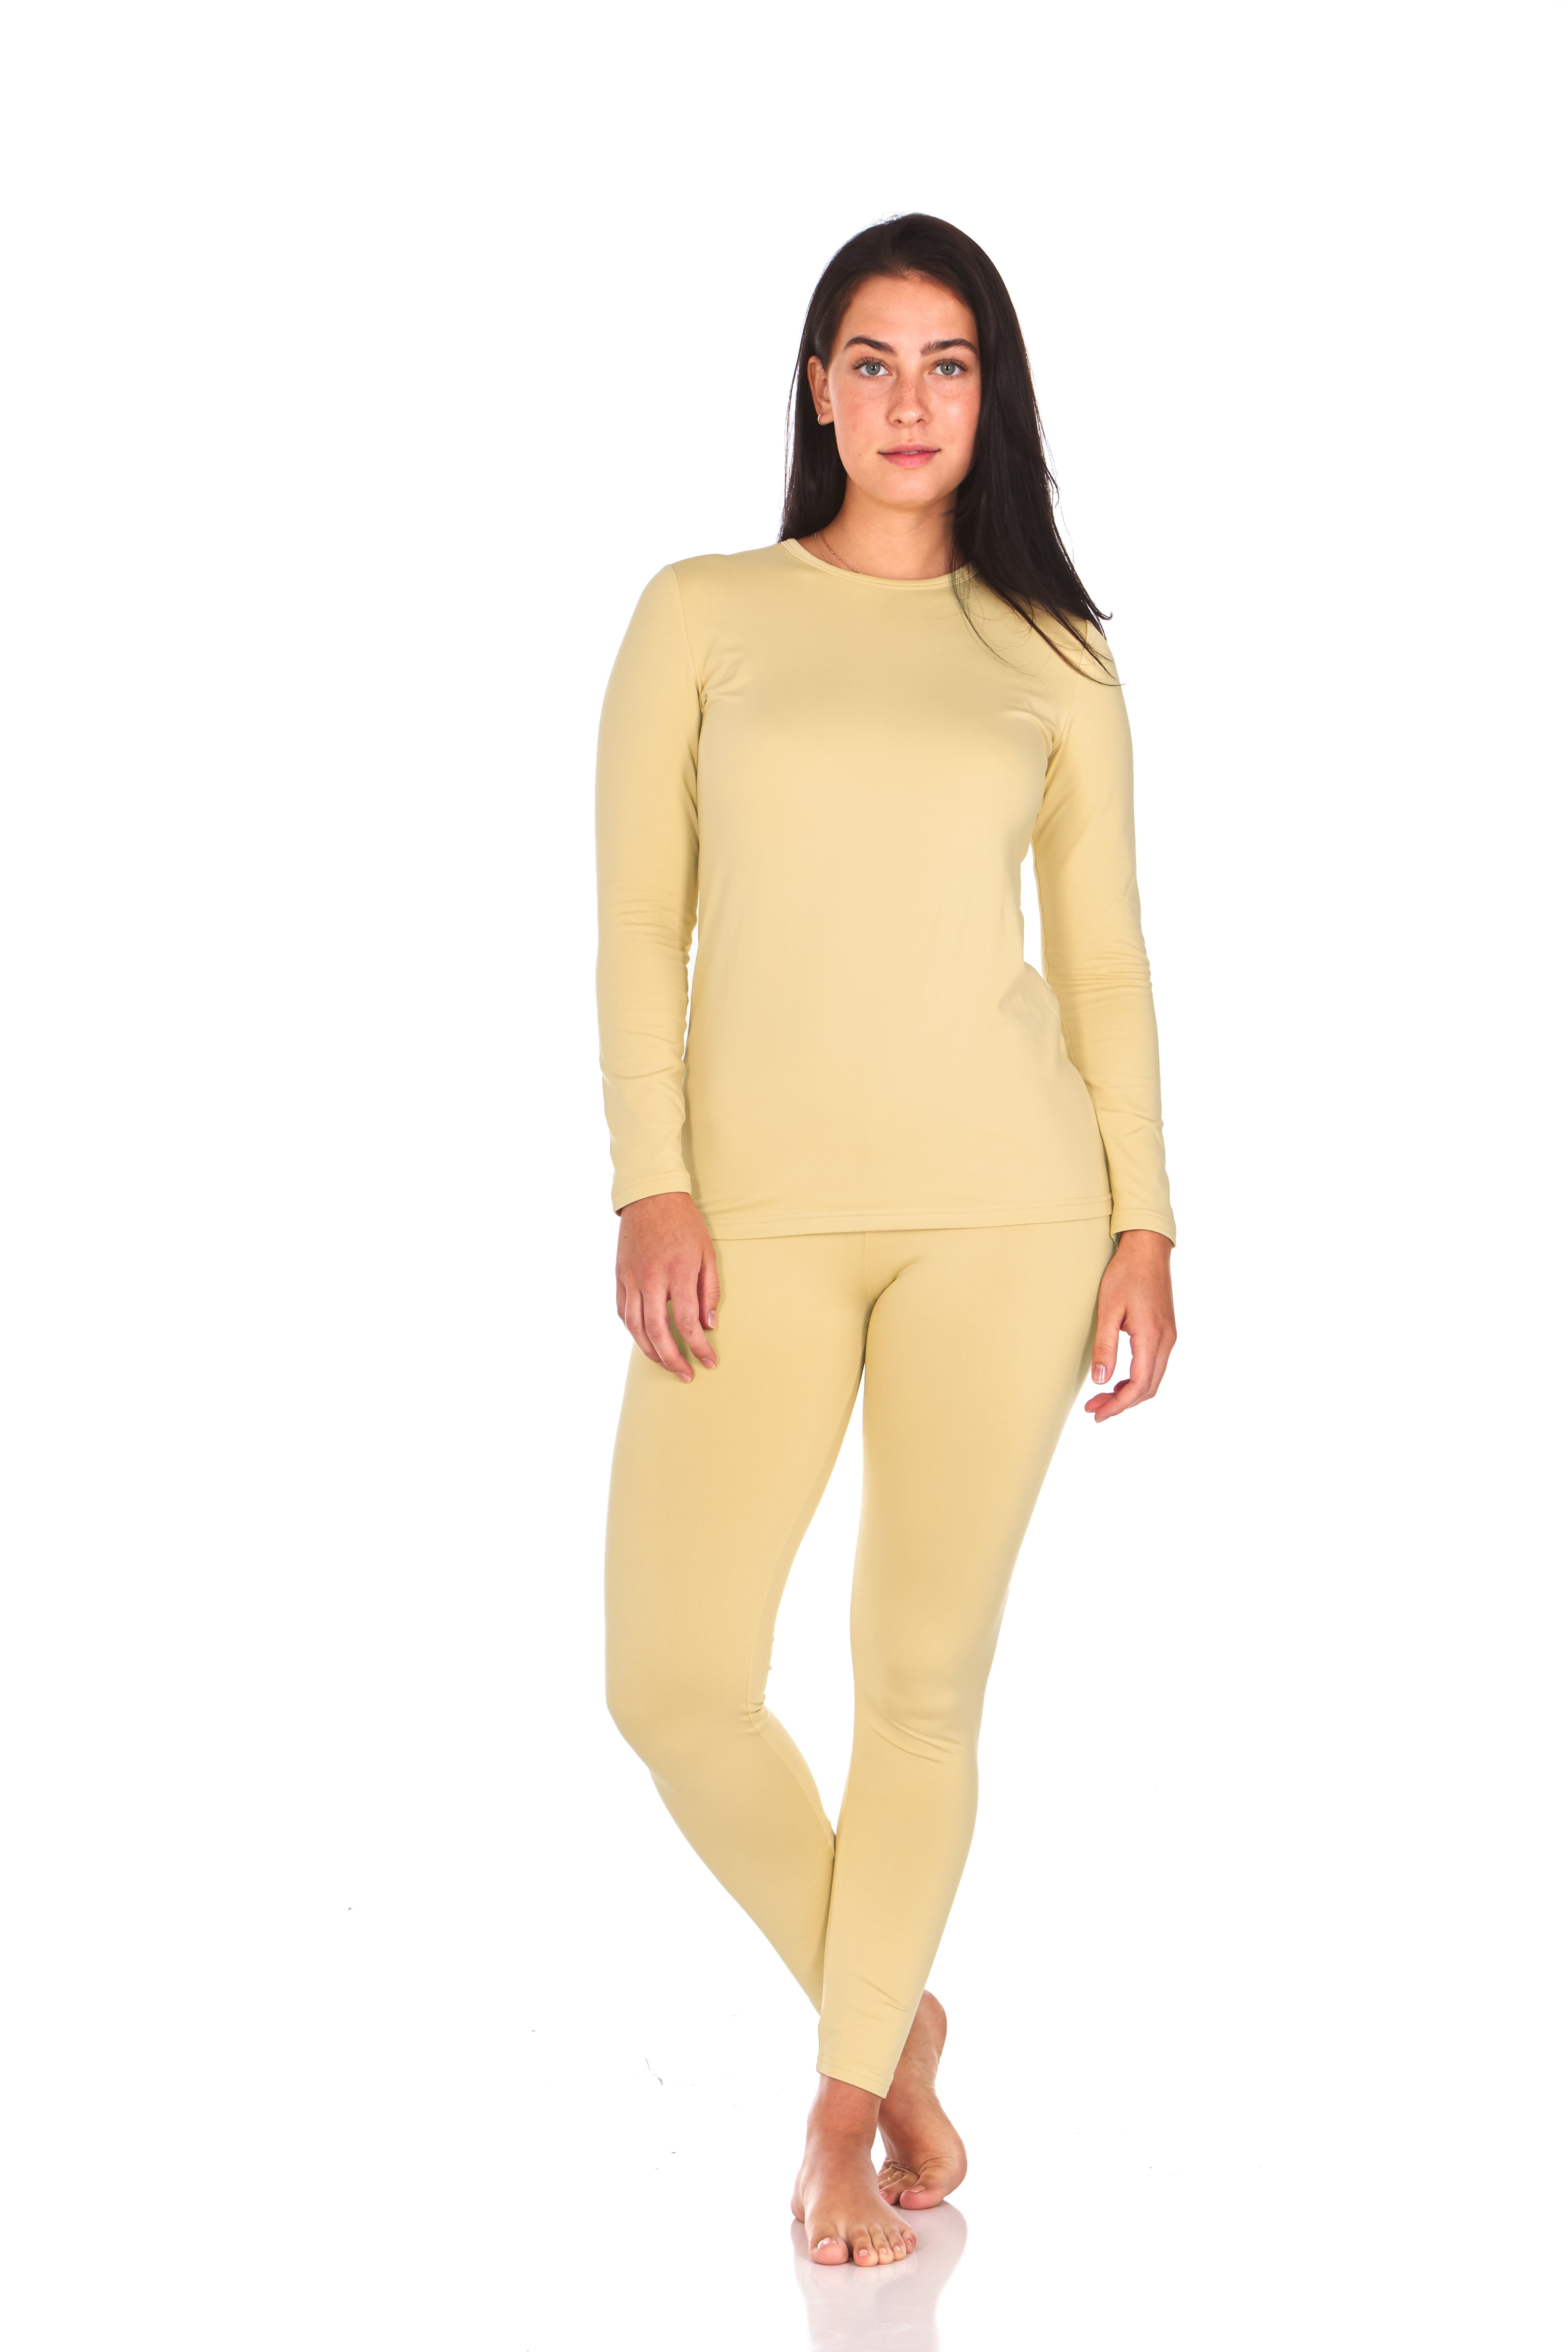 Thermajane Long Johns Thermal Underwear For Women Fleece Lined Base Layer  Pajama Set Cold Weather